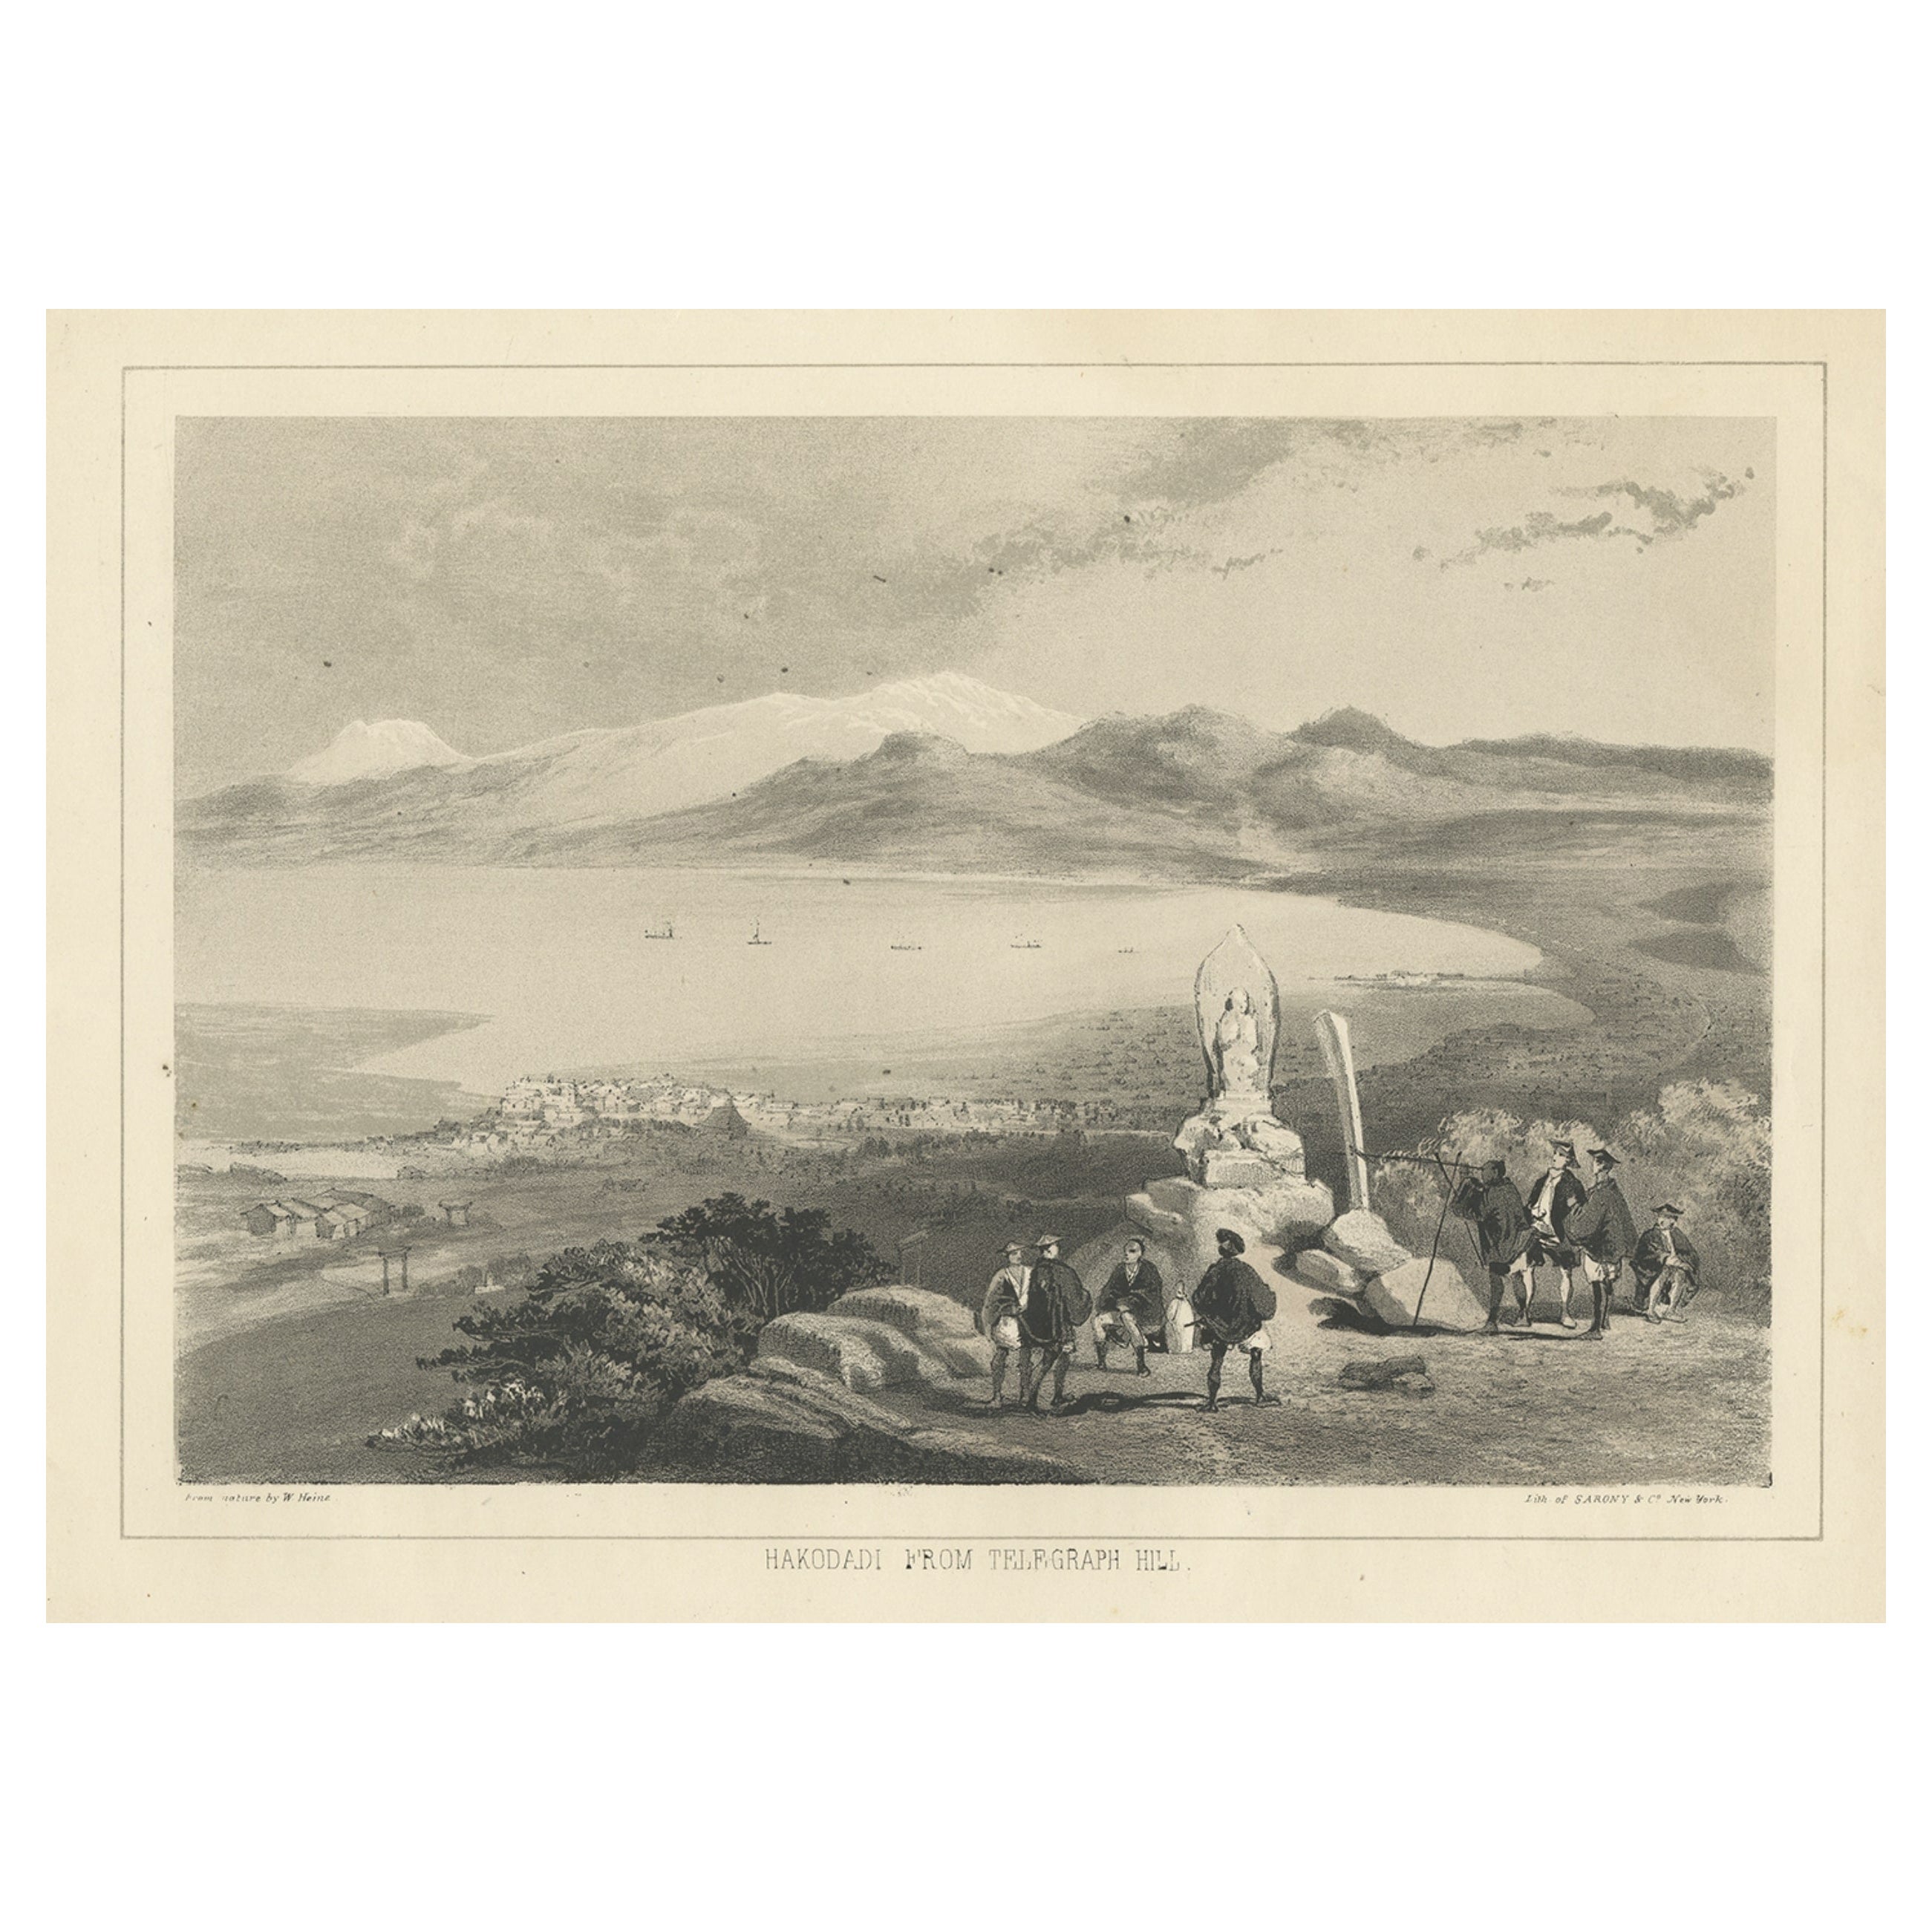 Antique Print of Hakodate from Telegraph Hill in Oshima, Hokkaido, Japan For Sale